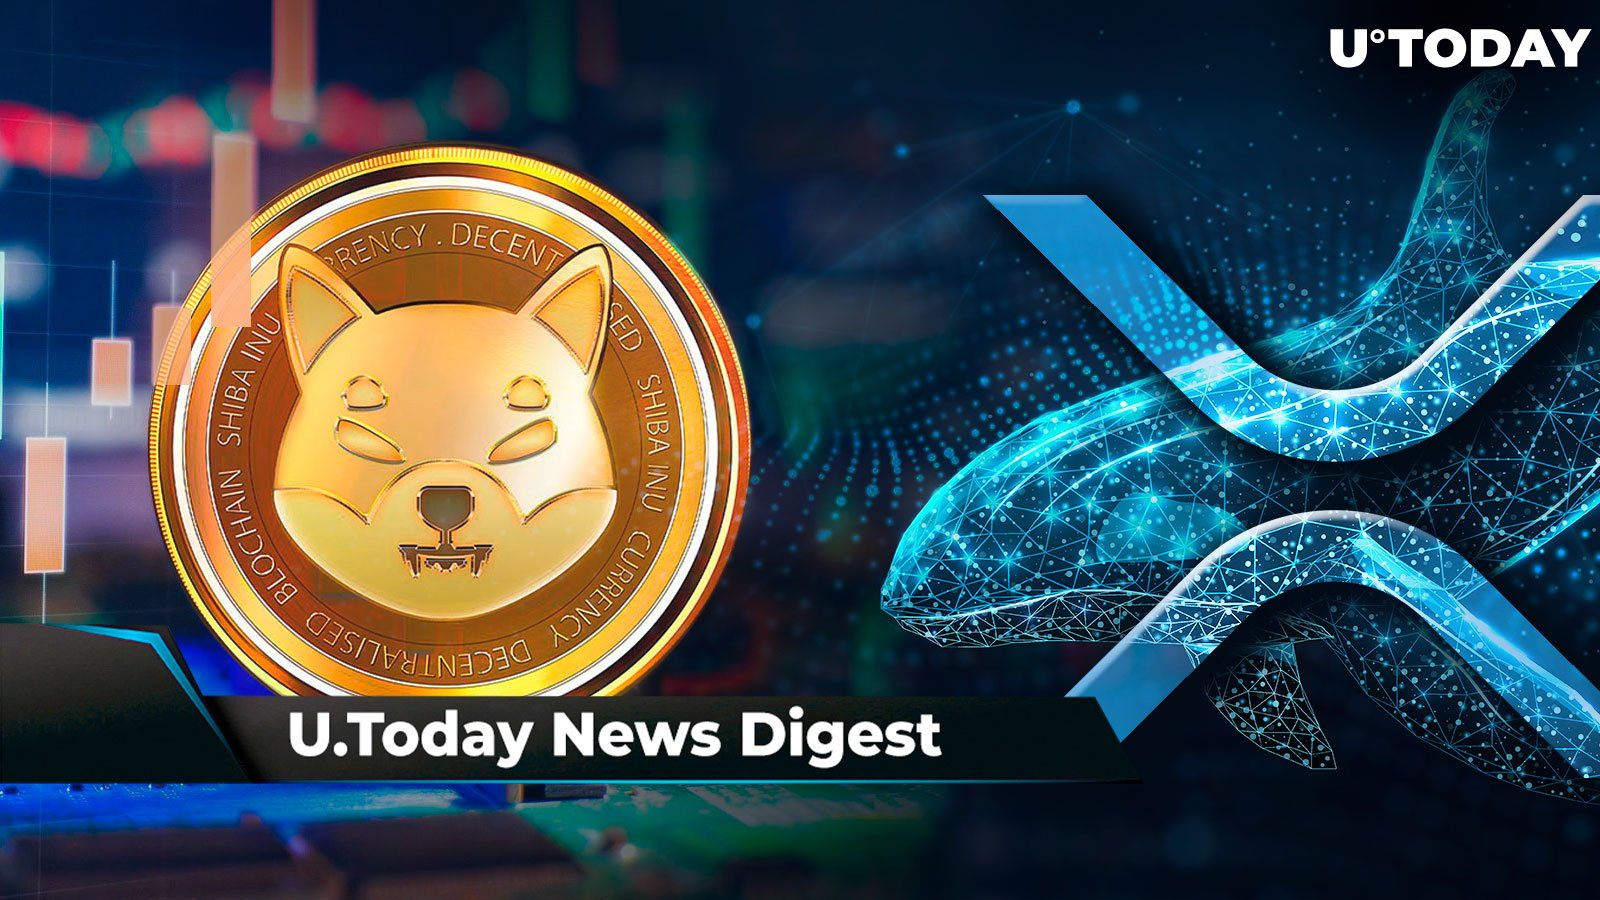 SHIB Official Shares One Mistake With Shibarium Made by Shytoshi Kusama, XRP Whales Accumulate Billions of Tokens, SHIB Sheds 100 Million Tokens: Crypto News Digest by U.Today